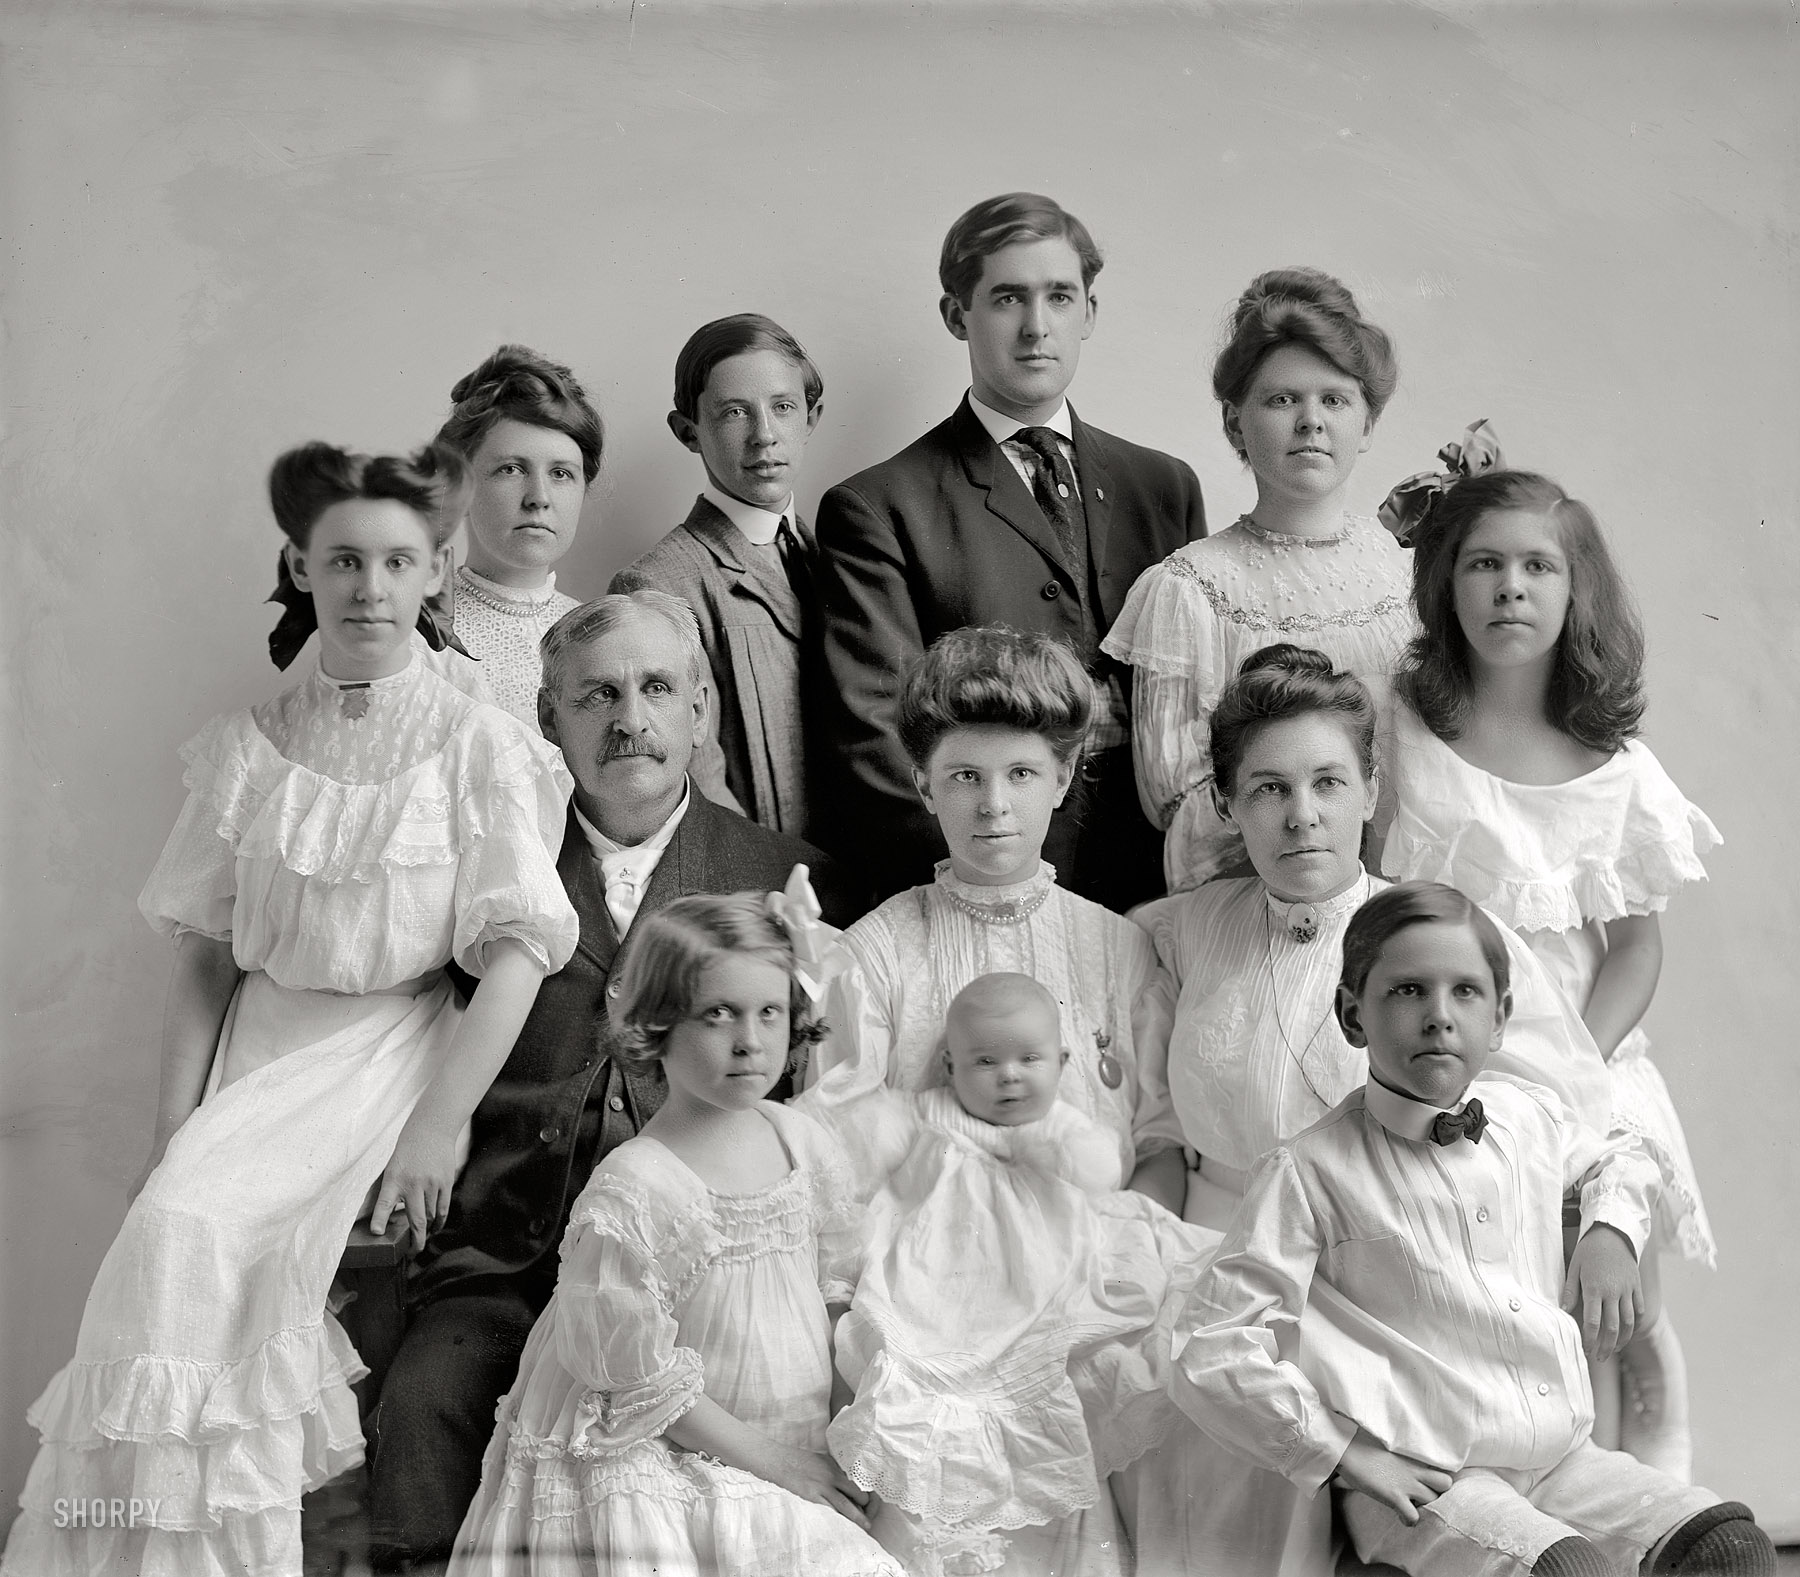 Washington, D.C., circa 1905. "Family Group." Any members of the Group family still out there? Harris & Ewing Collection glass negative. View full size.